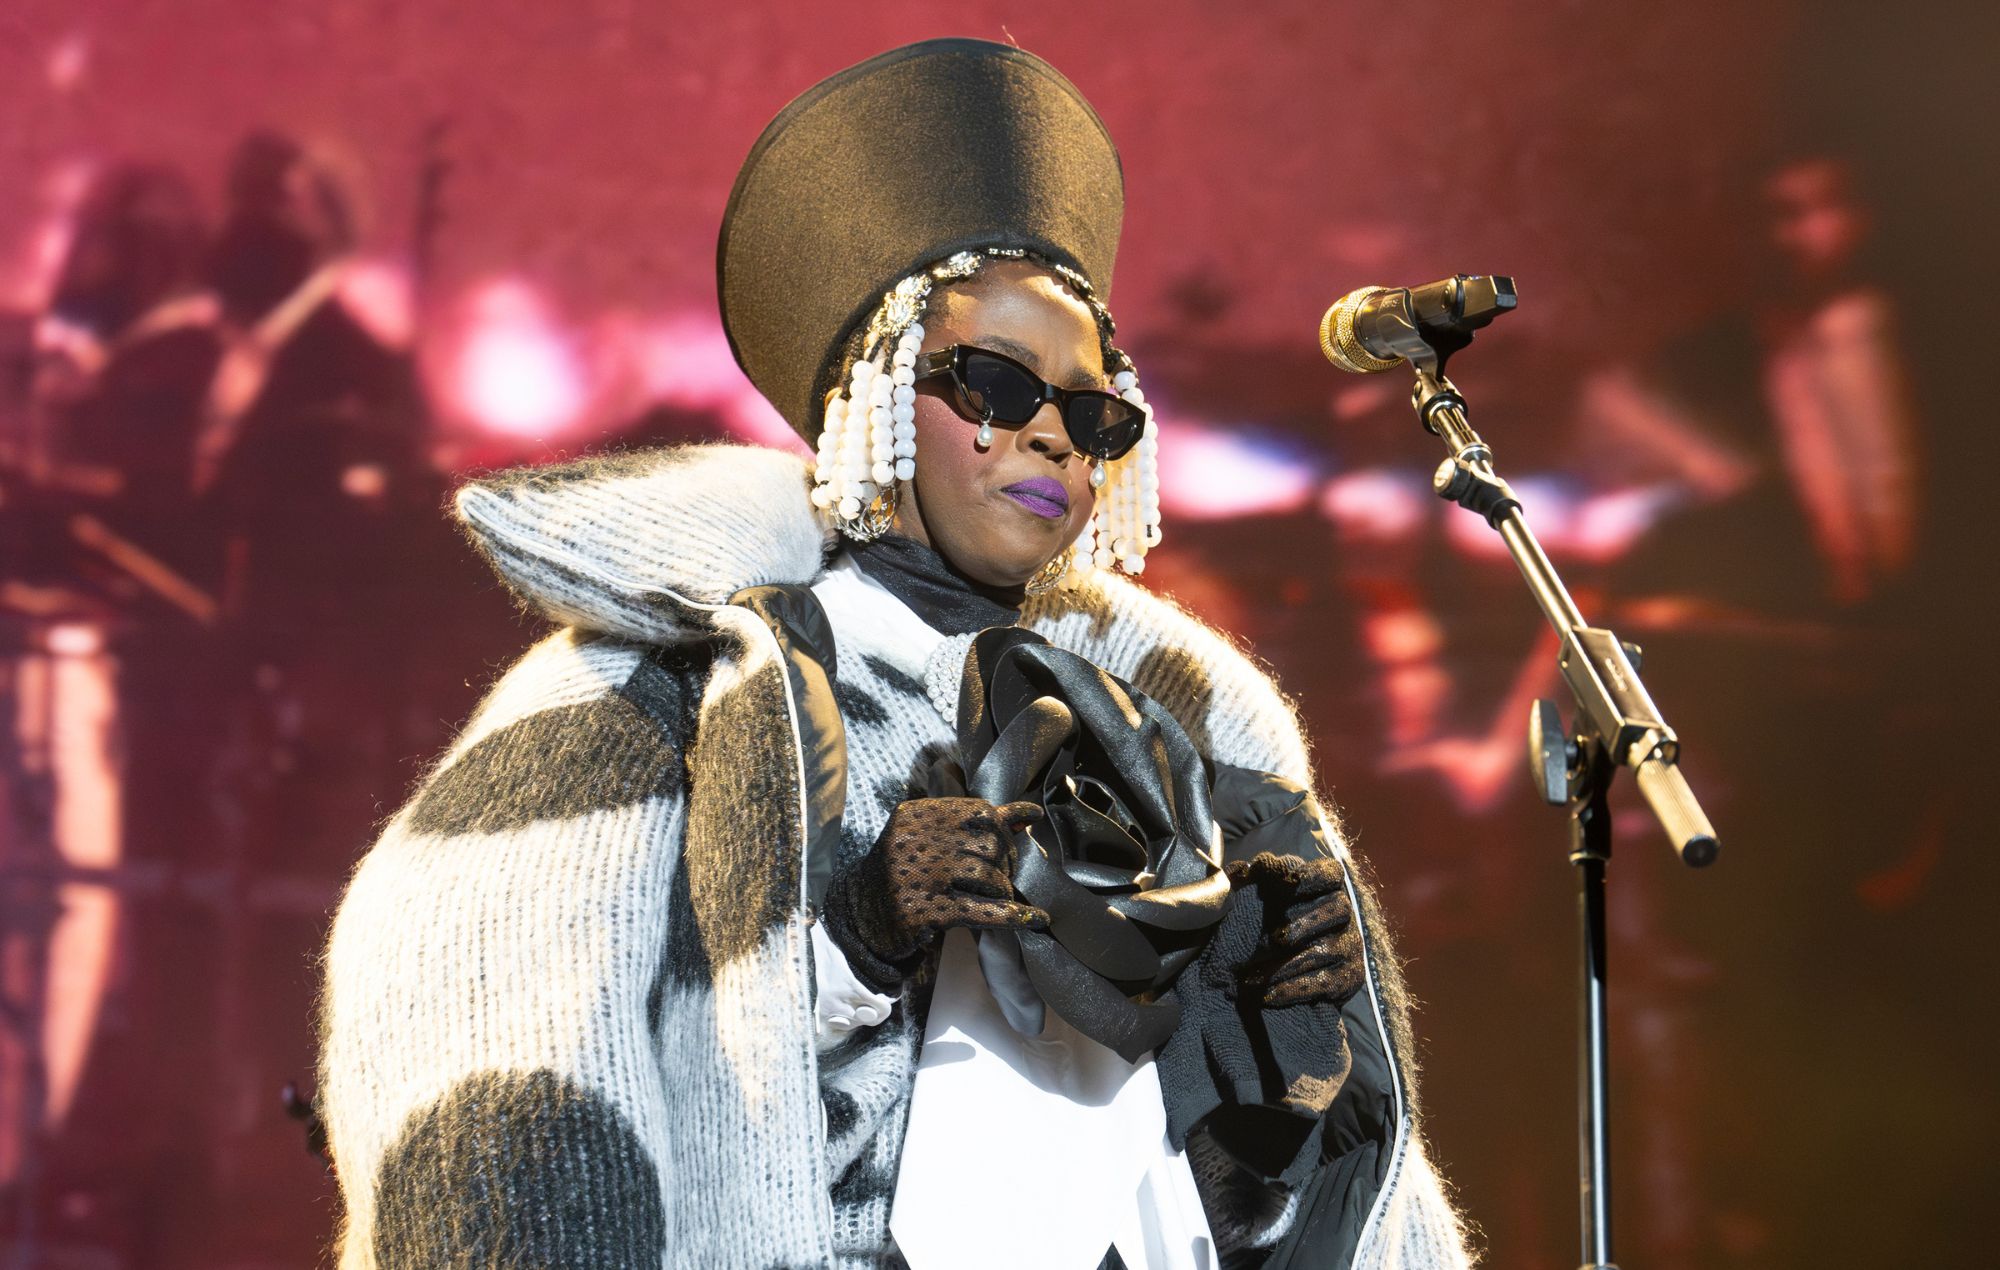 Lauryn Hill postpones tour with Fugees due to “serious vocal strain”